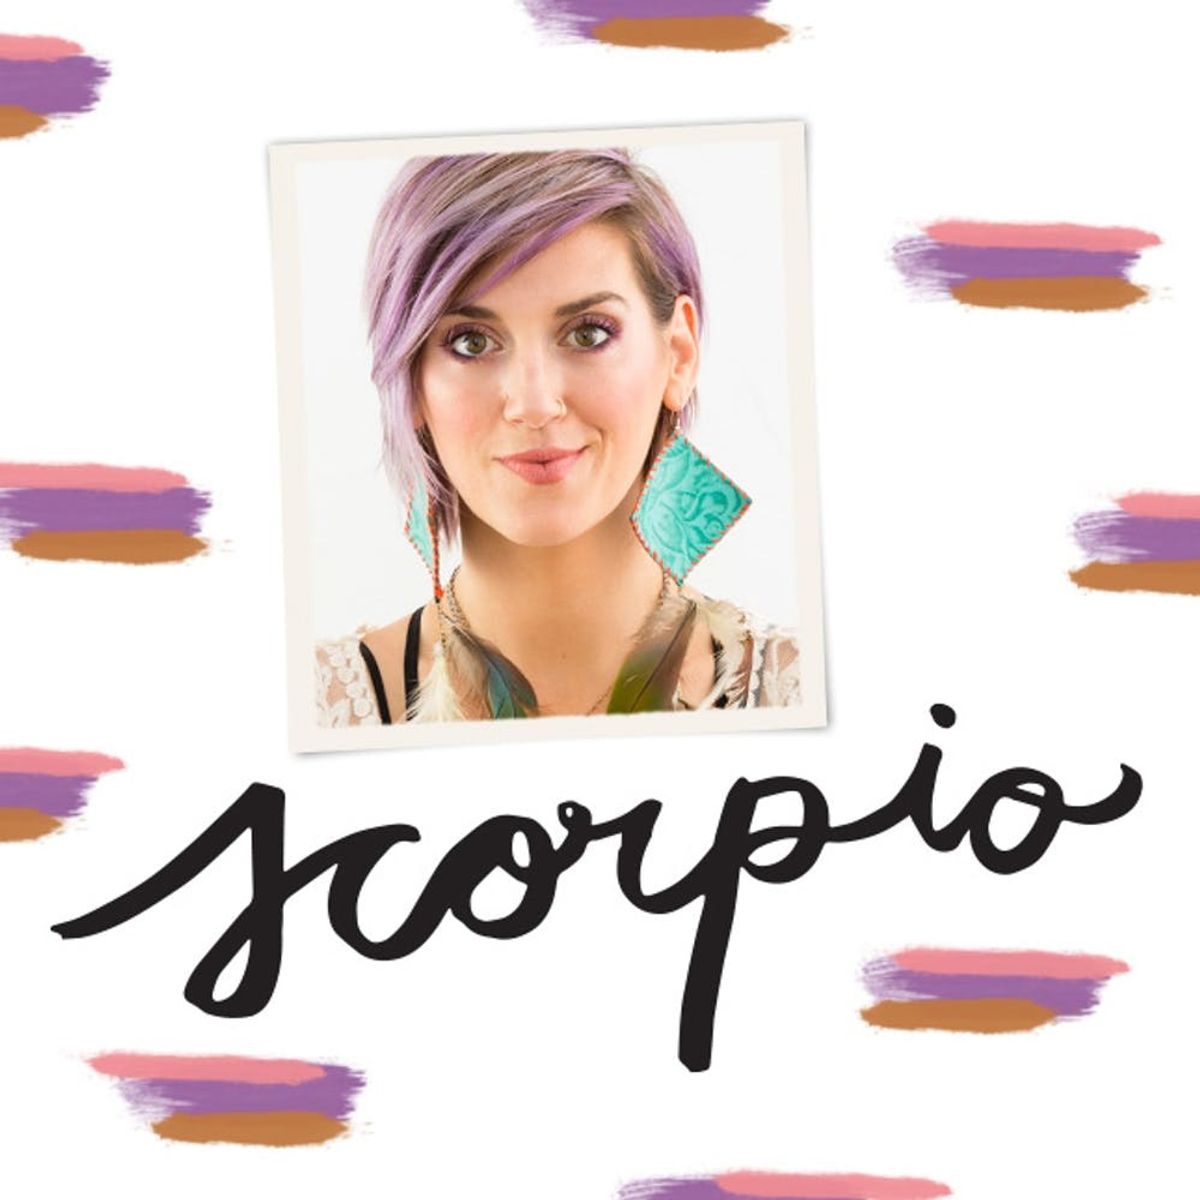 The Best Makeup for Your Zodiac Sign: Scorpio Edition